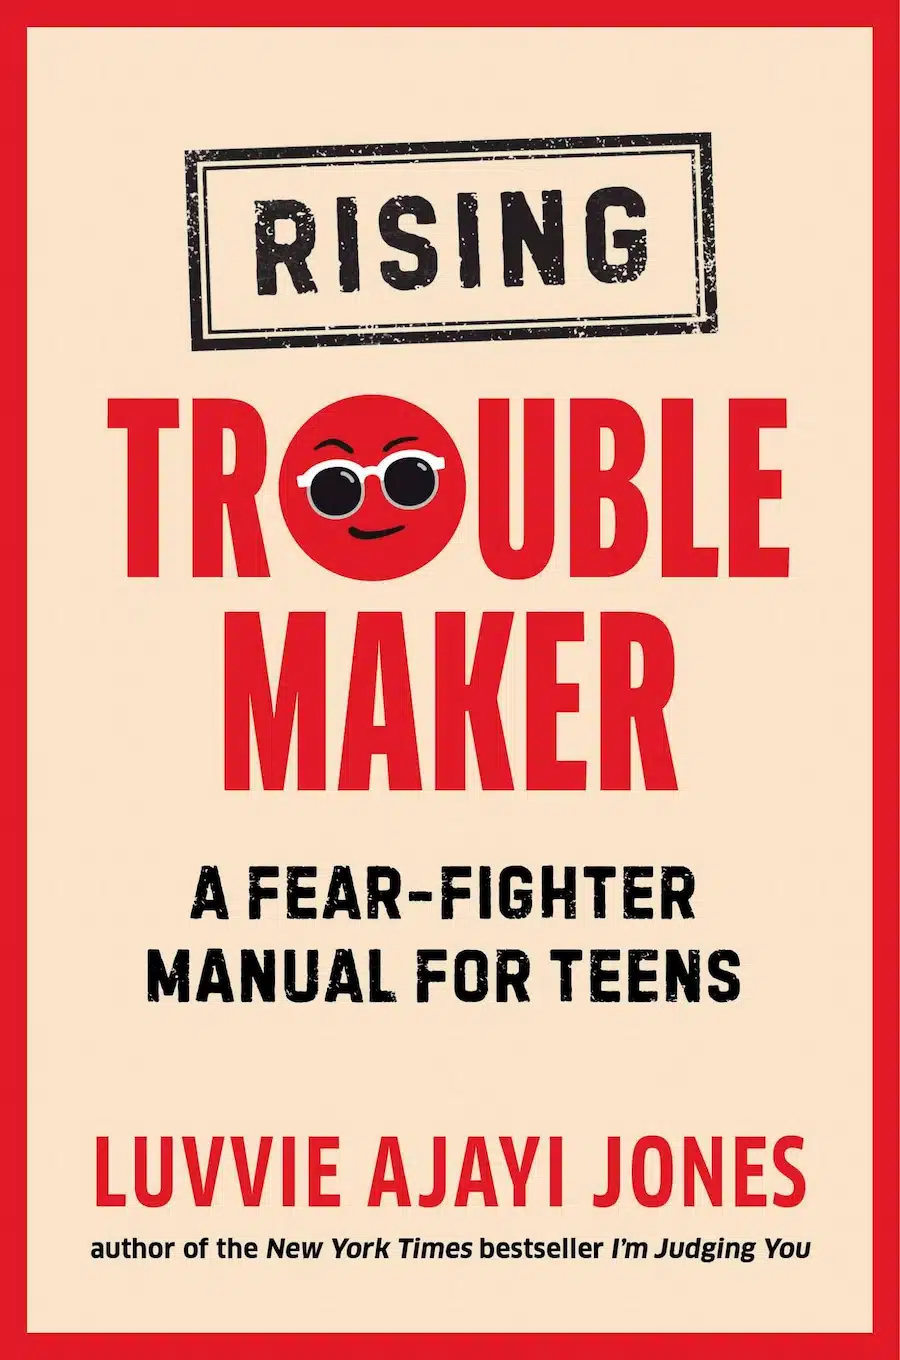 Flat Book Cover - Rising Troublemaker Book